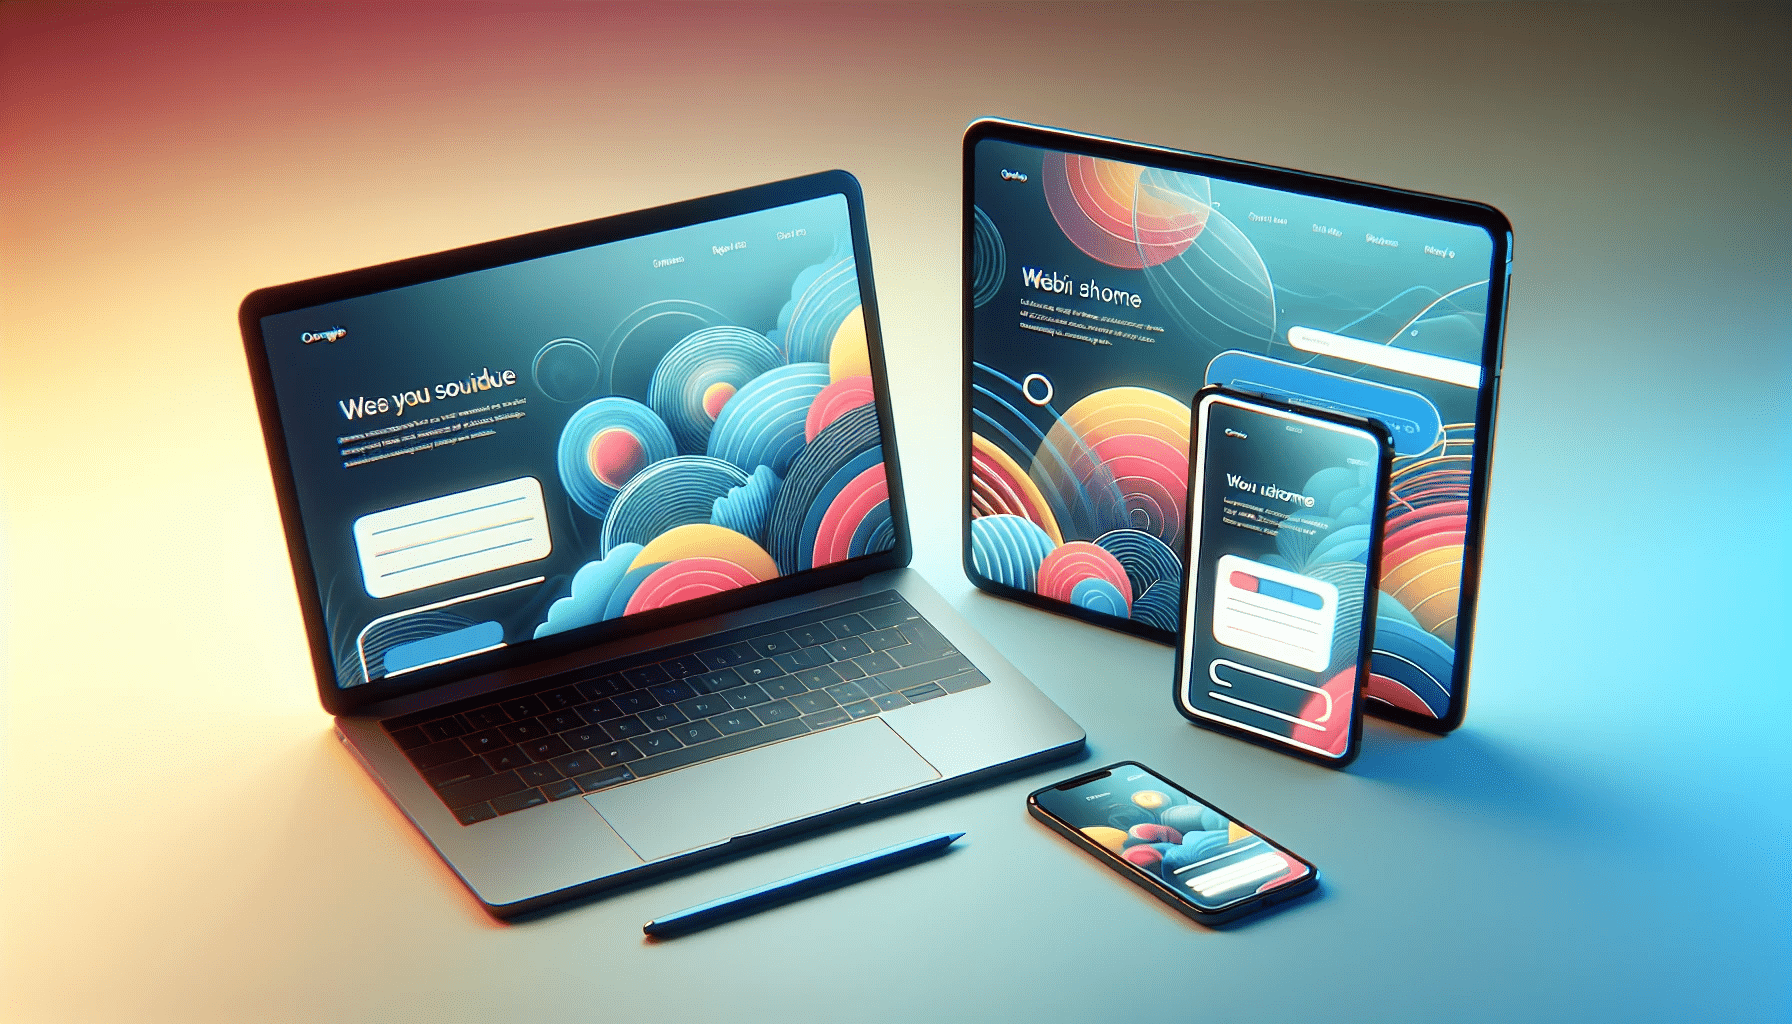 An illustration of a responsive web design displayed on various devices